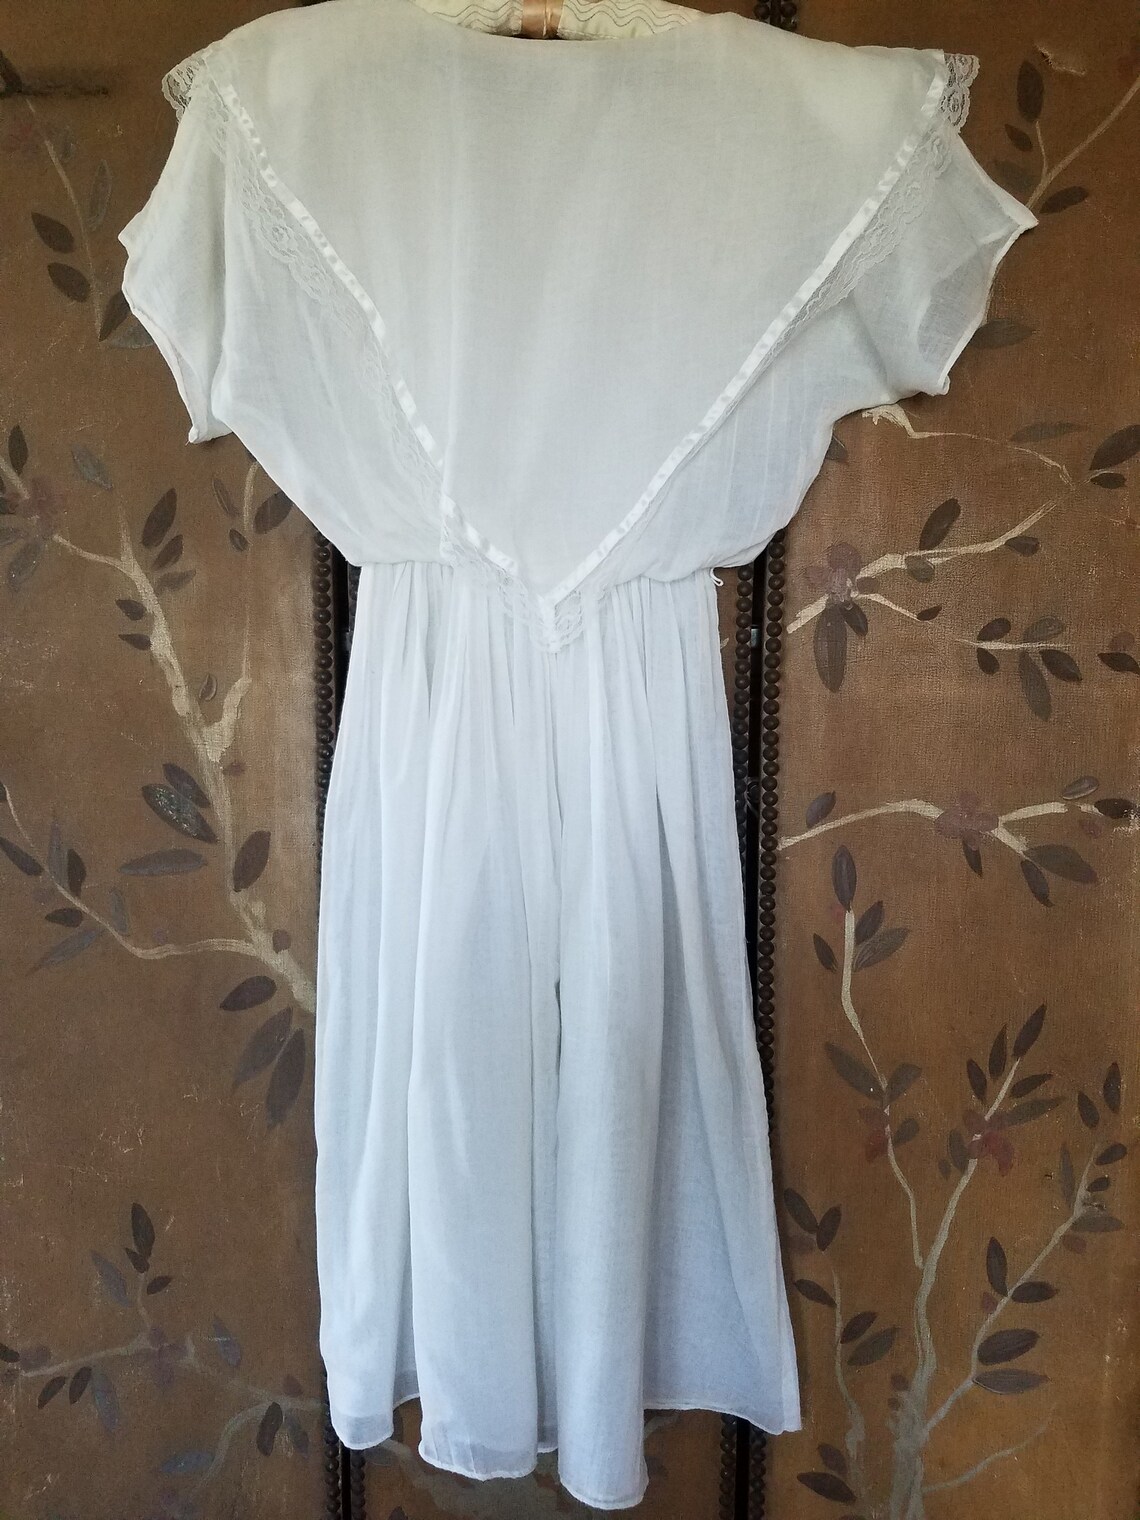 80's sheer white gauze summer dress with large front | Etsy